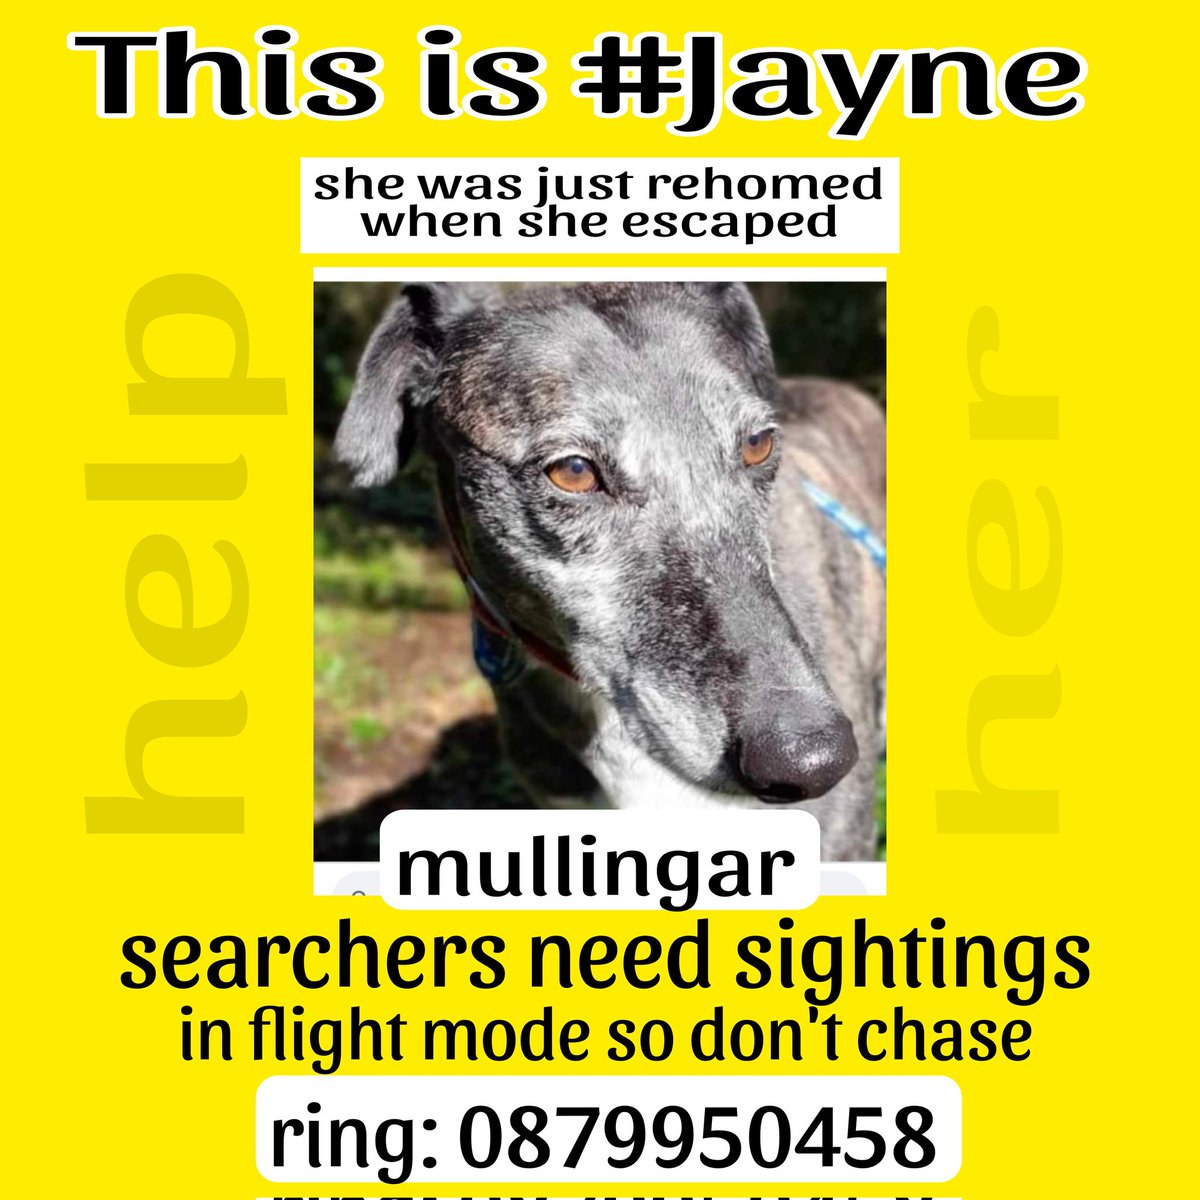 No sign of #Jayne in #Mullingar area.Just dropped off to her new home by #ISPCA when she ran away. She must be so afraid as doesn't know area. Please share & help searchers get sightings. #Lostdog